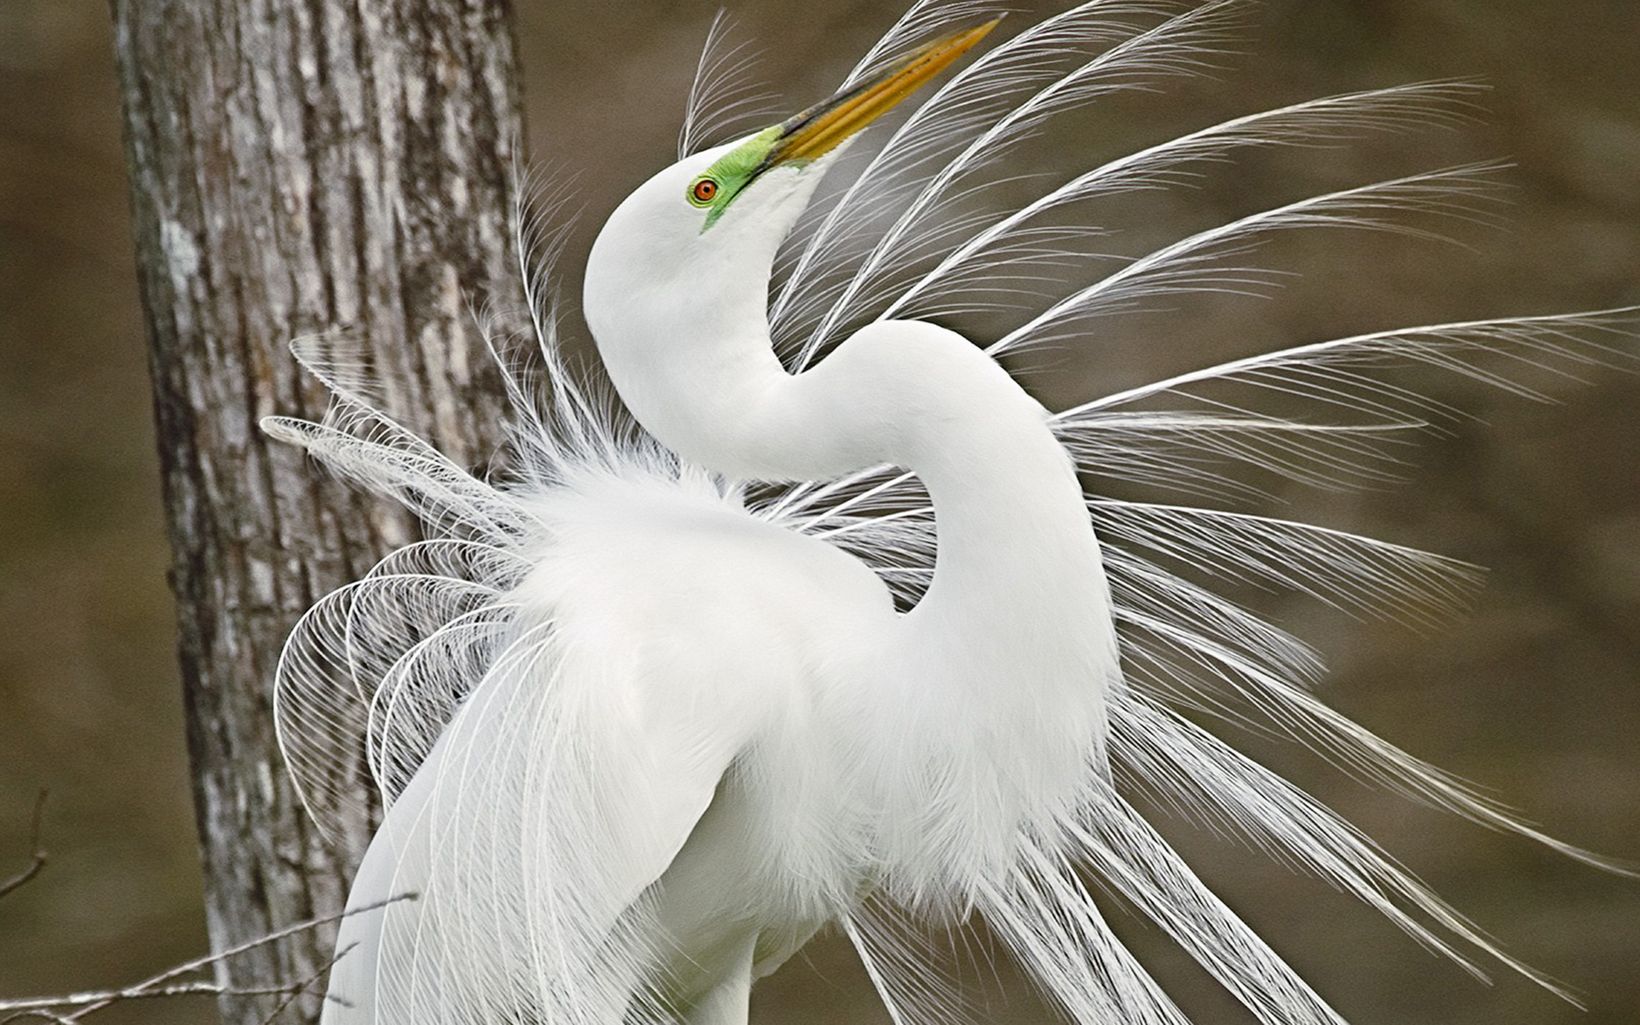 A white bird displays showy feathers.